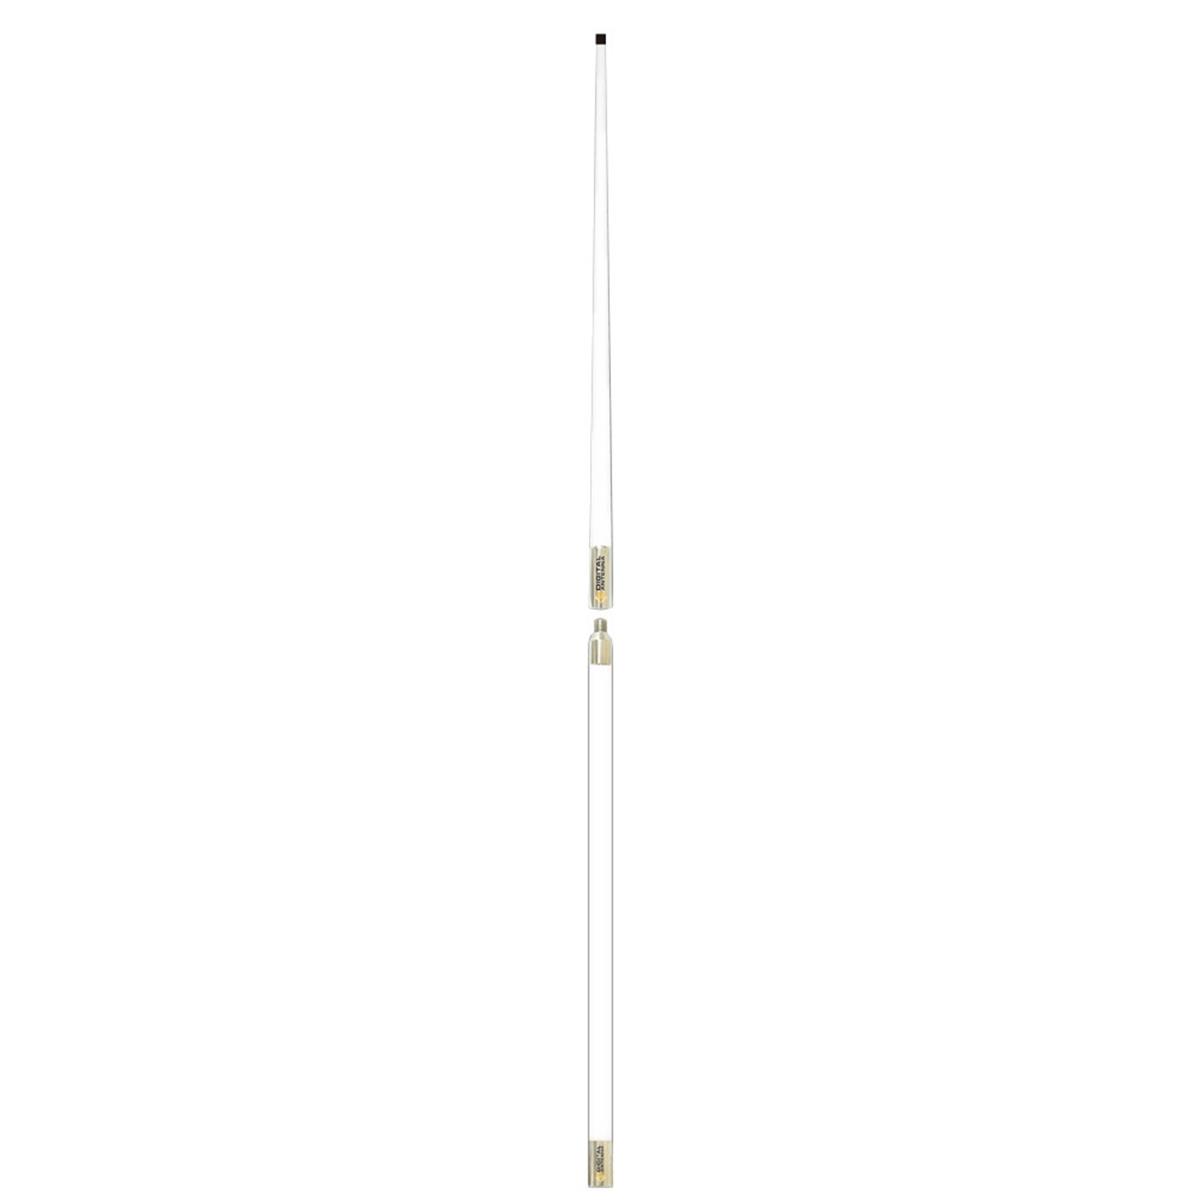 Picture of Digital Antenna 532-VW-S 532-VW-S 16 ft. Antenna - White